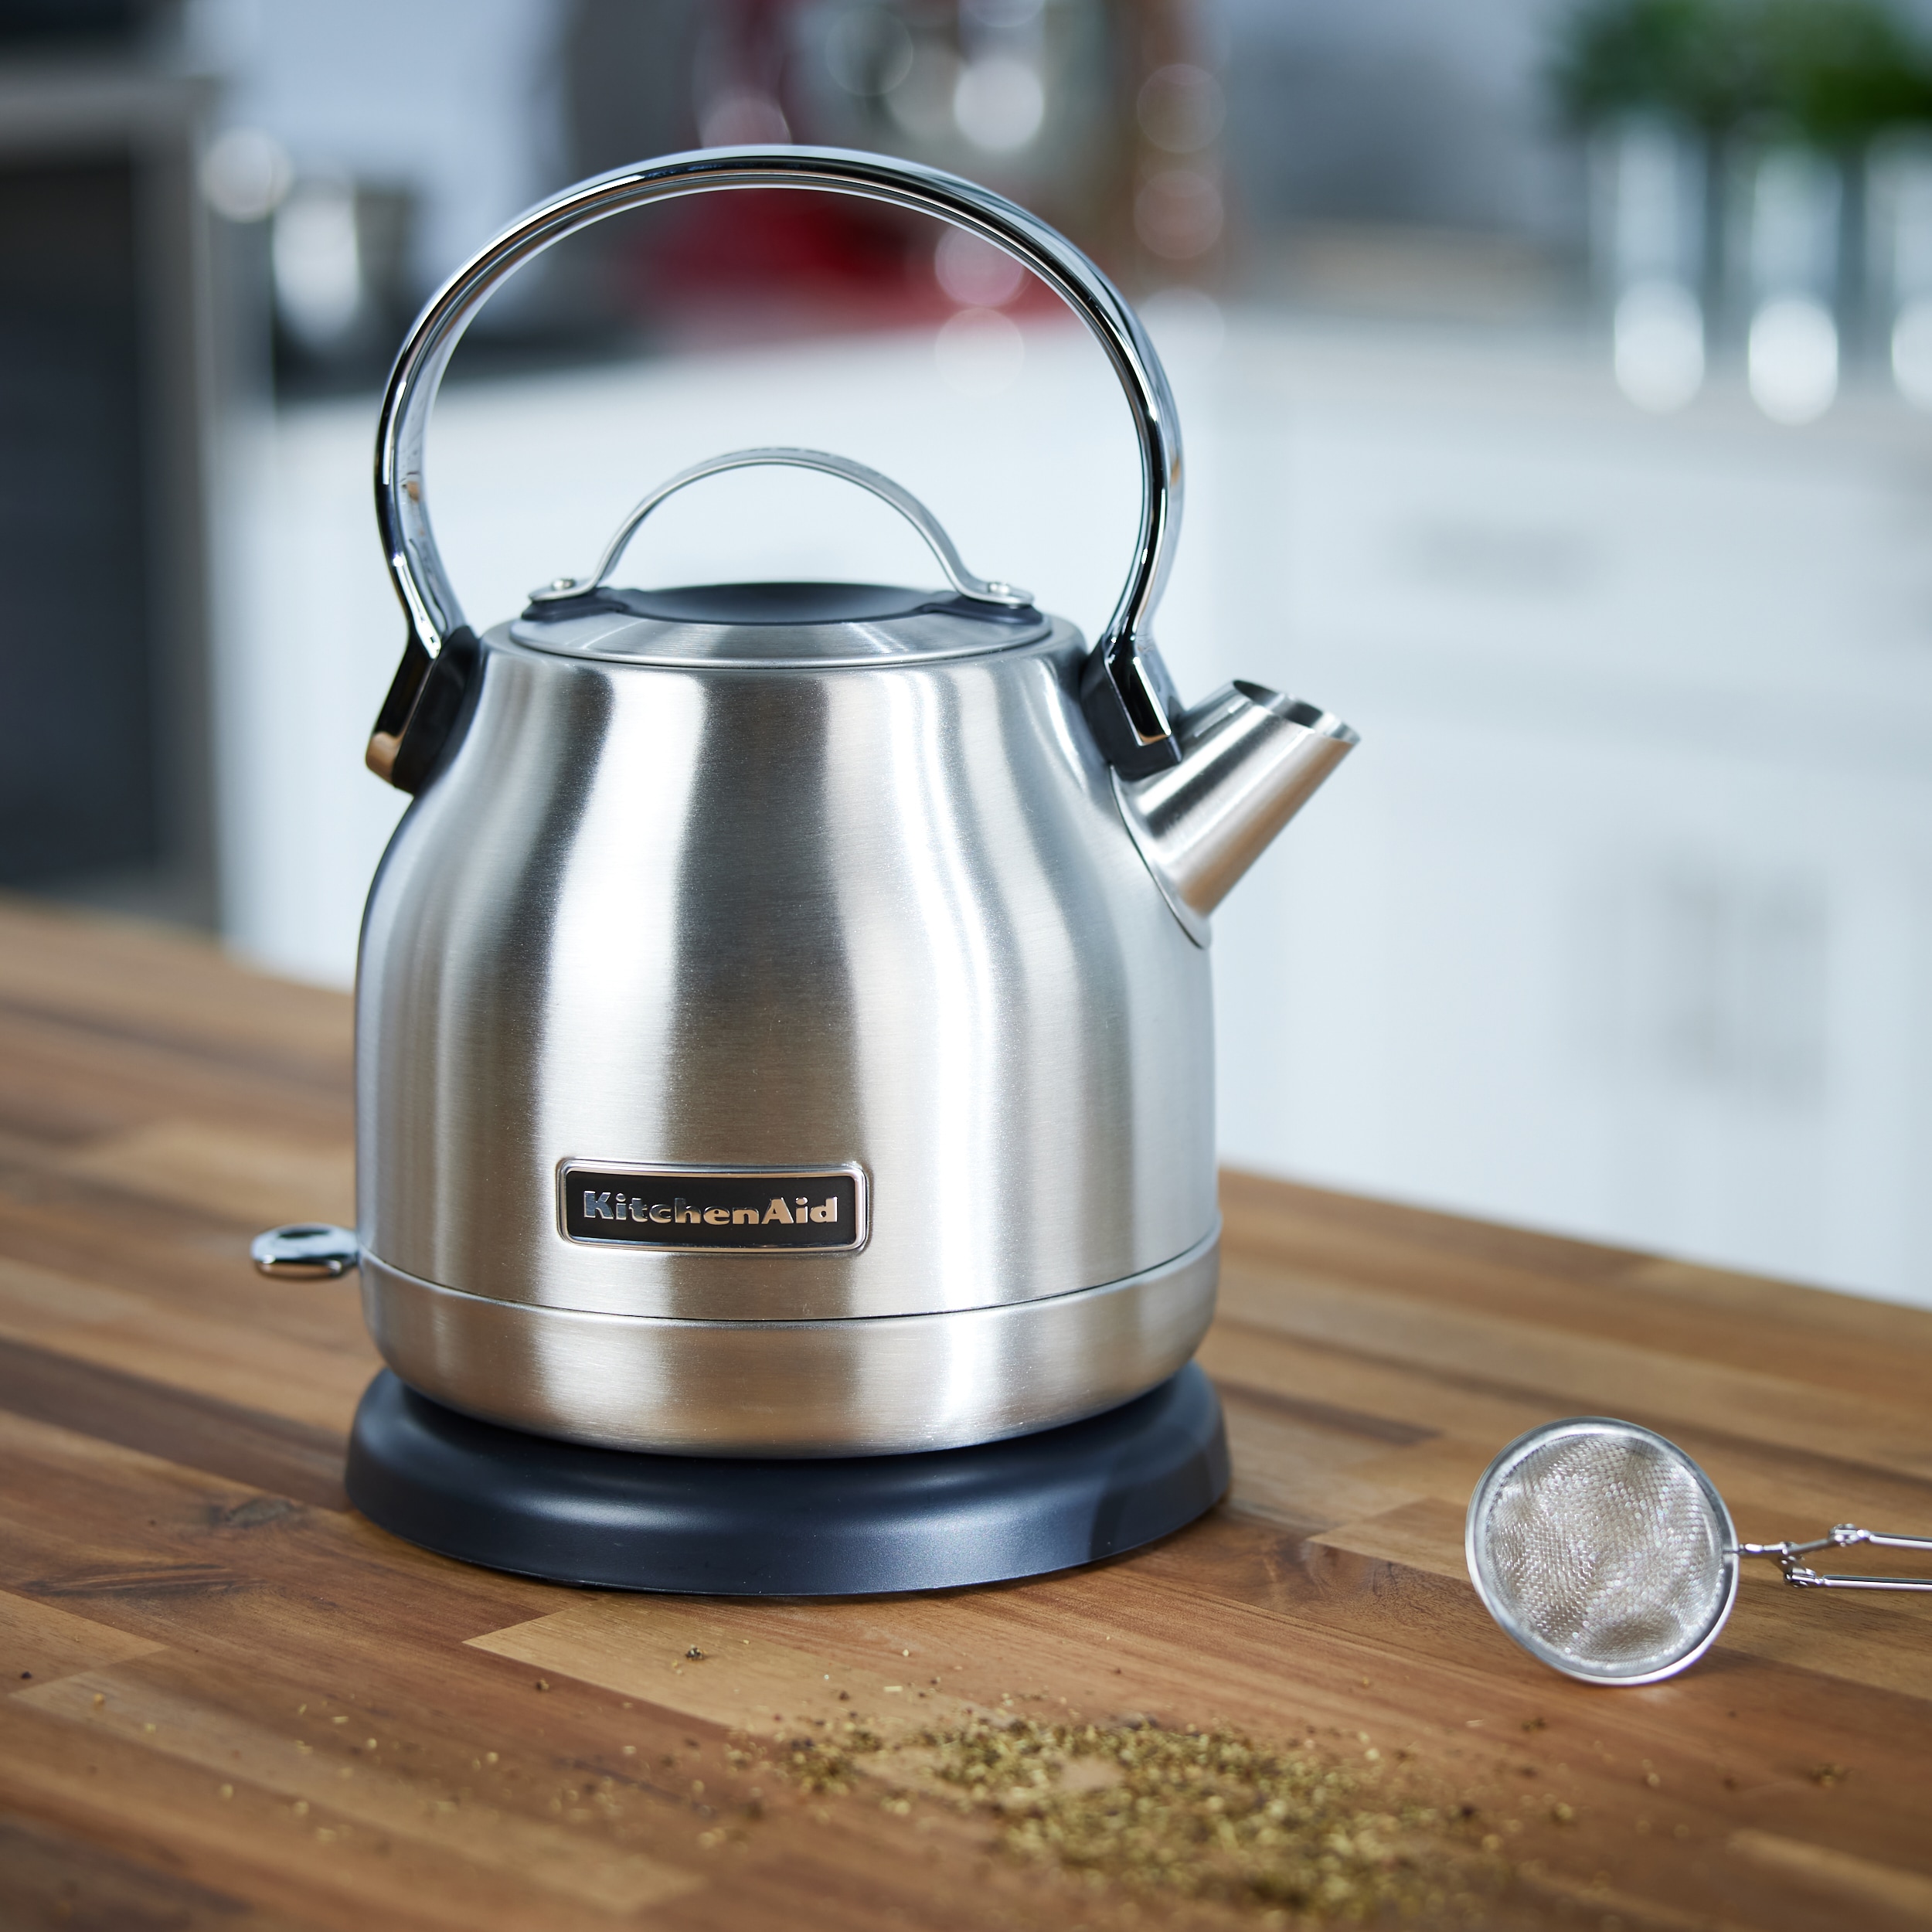 te Krage vært KitchenAid Stainless Steel 5-Cup Corded Manual Electric Kettle at Lowes.com